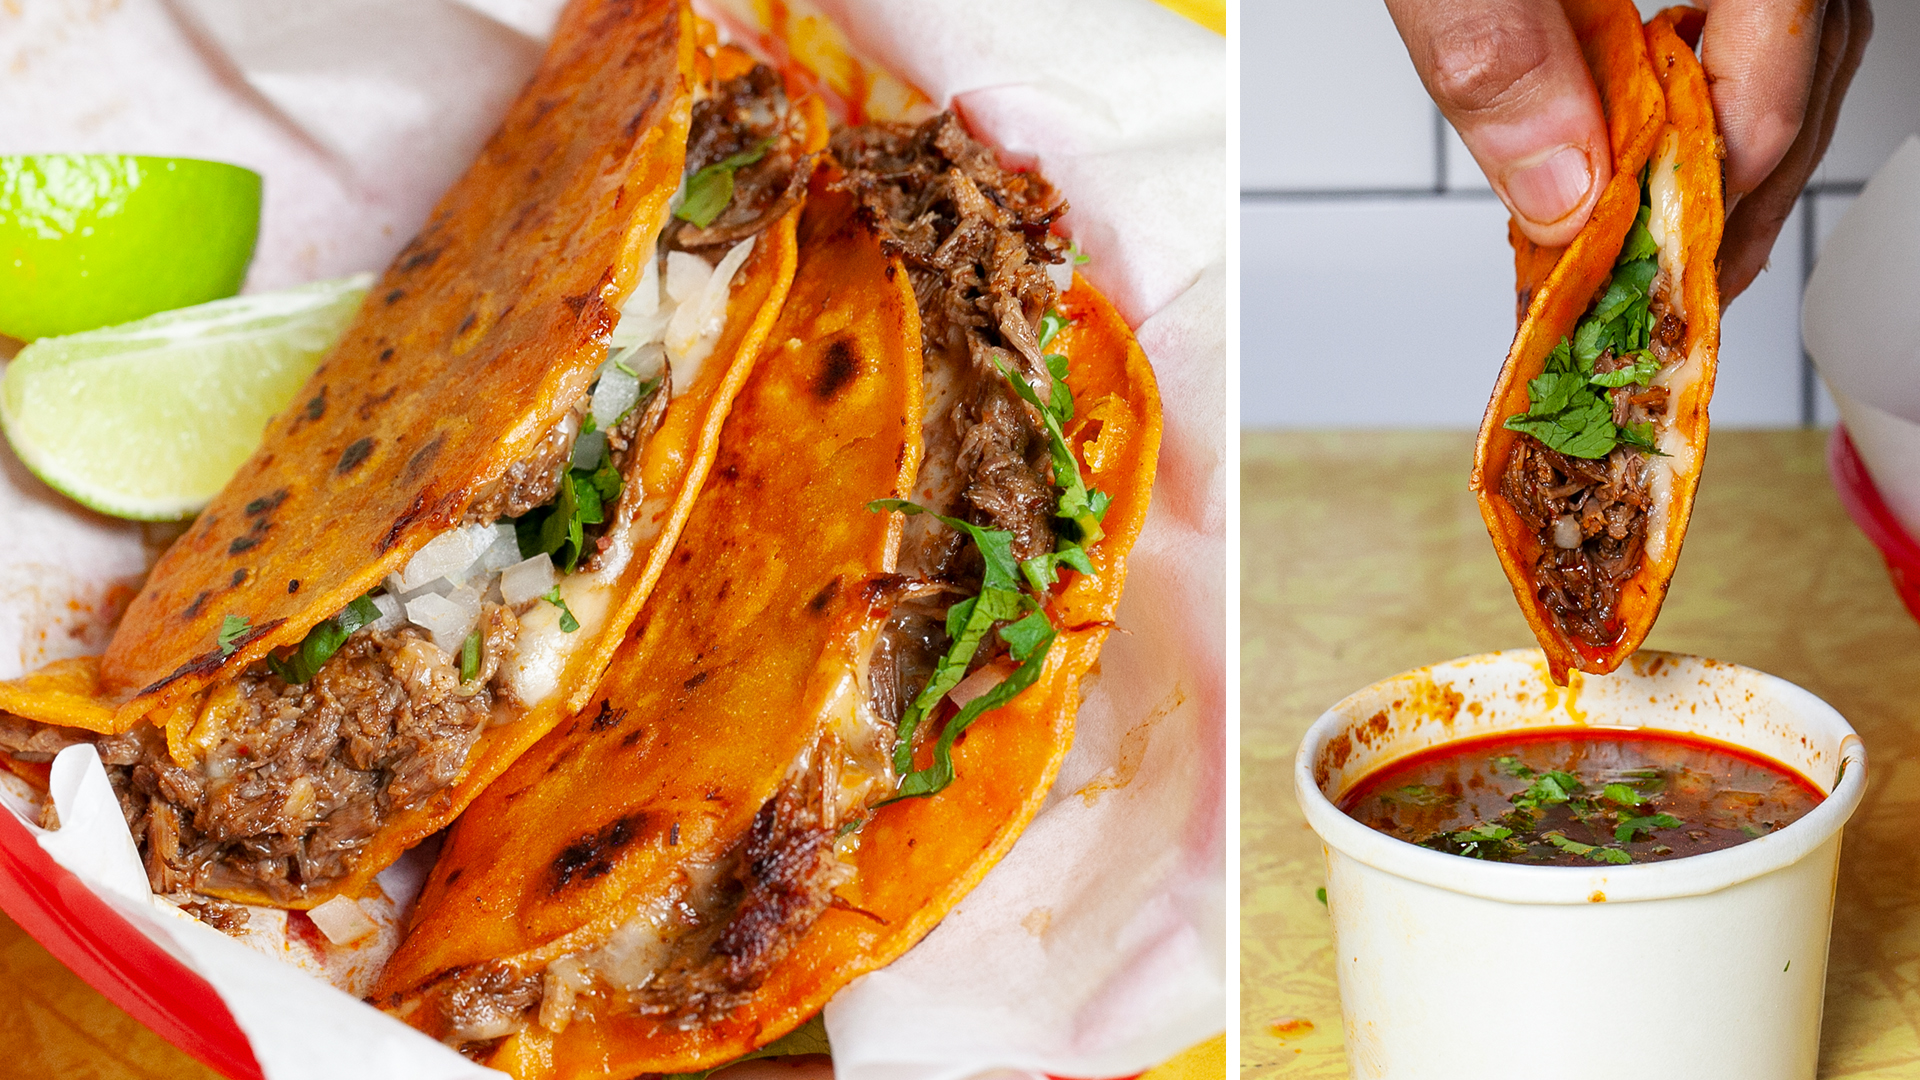 Juicy Birria Tacos Dipped In A Chile Consommé - VICE Video: Documentaries,  Films, News Videos